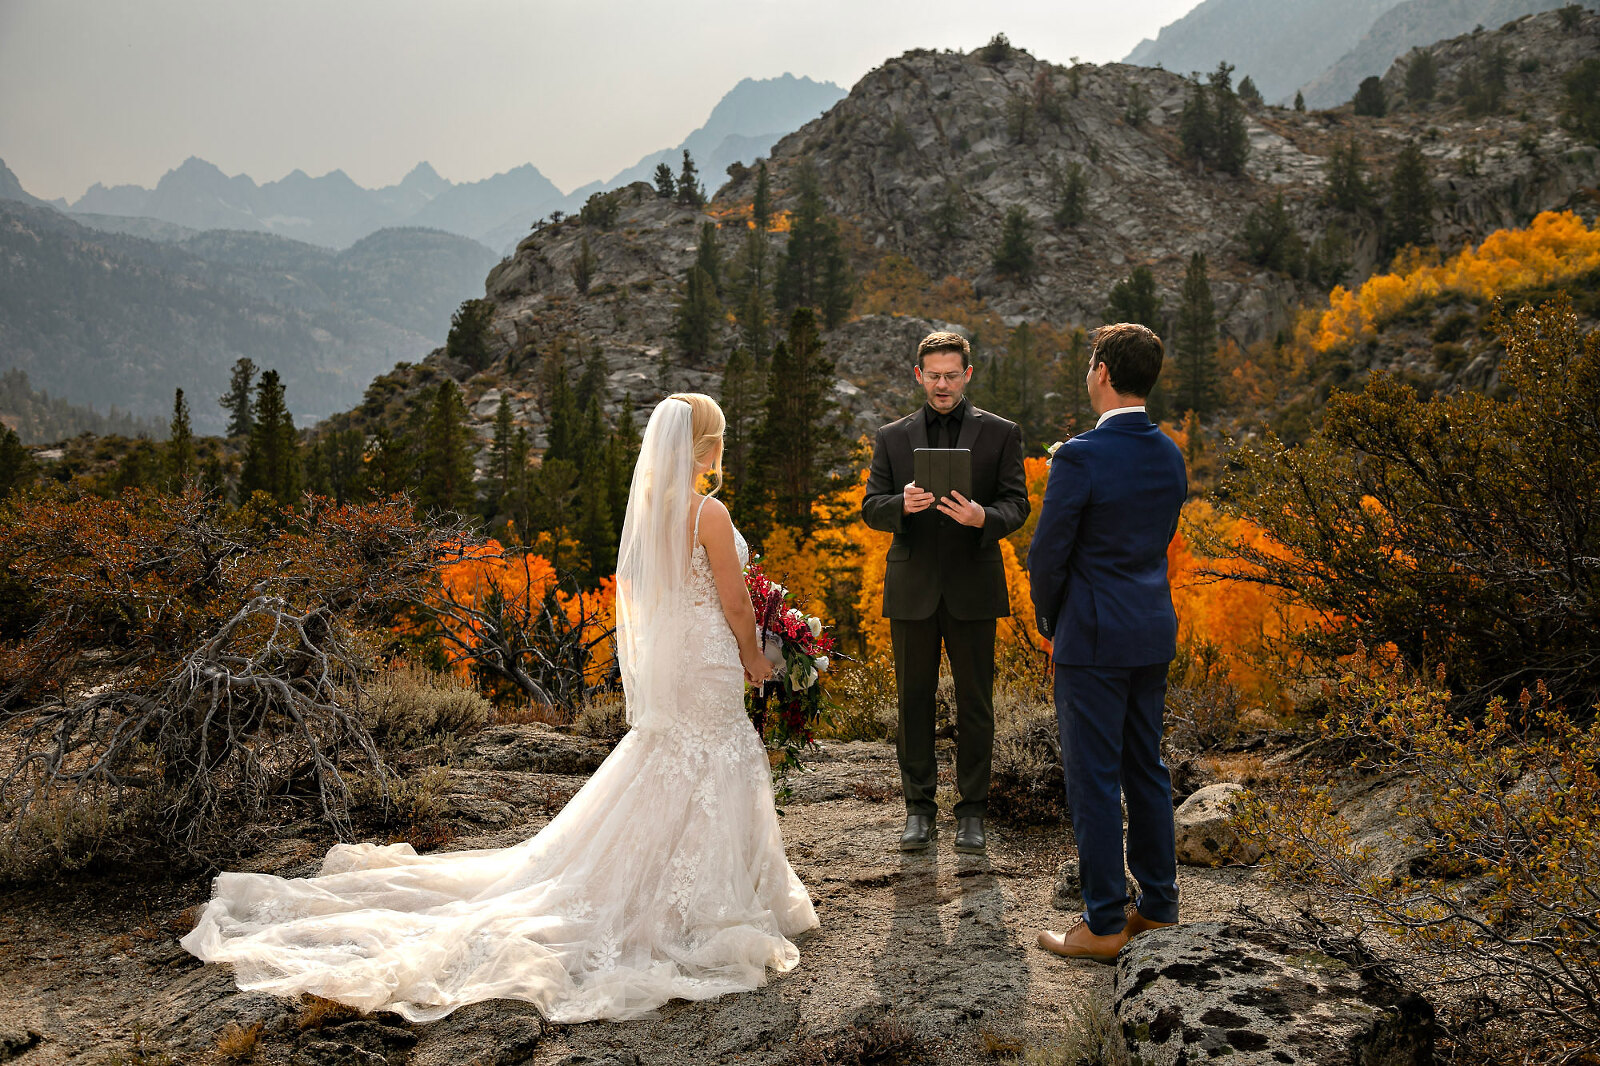 A wedding couple at their intimate wedding saying their vows with mountains.